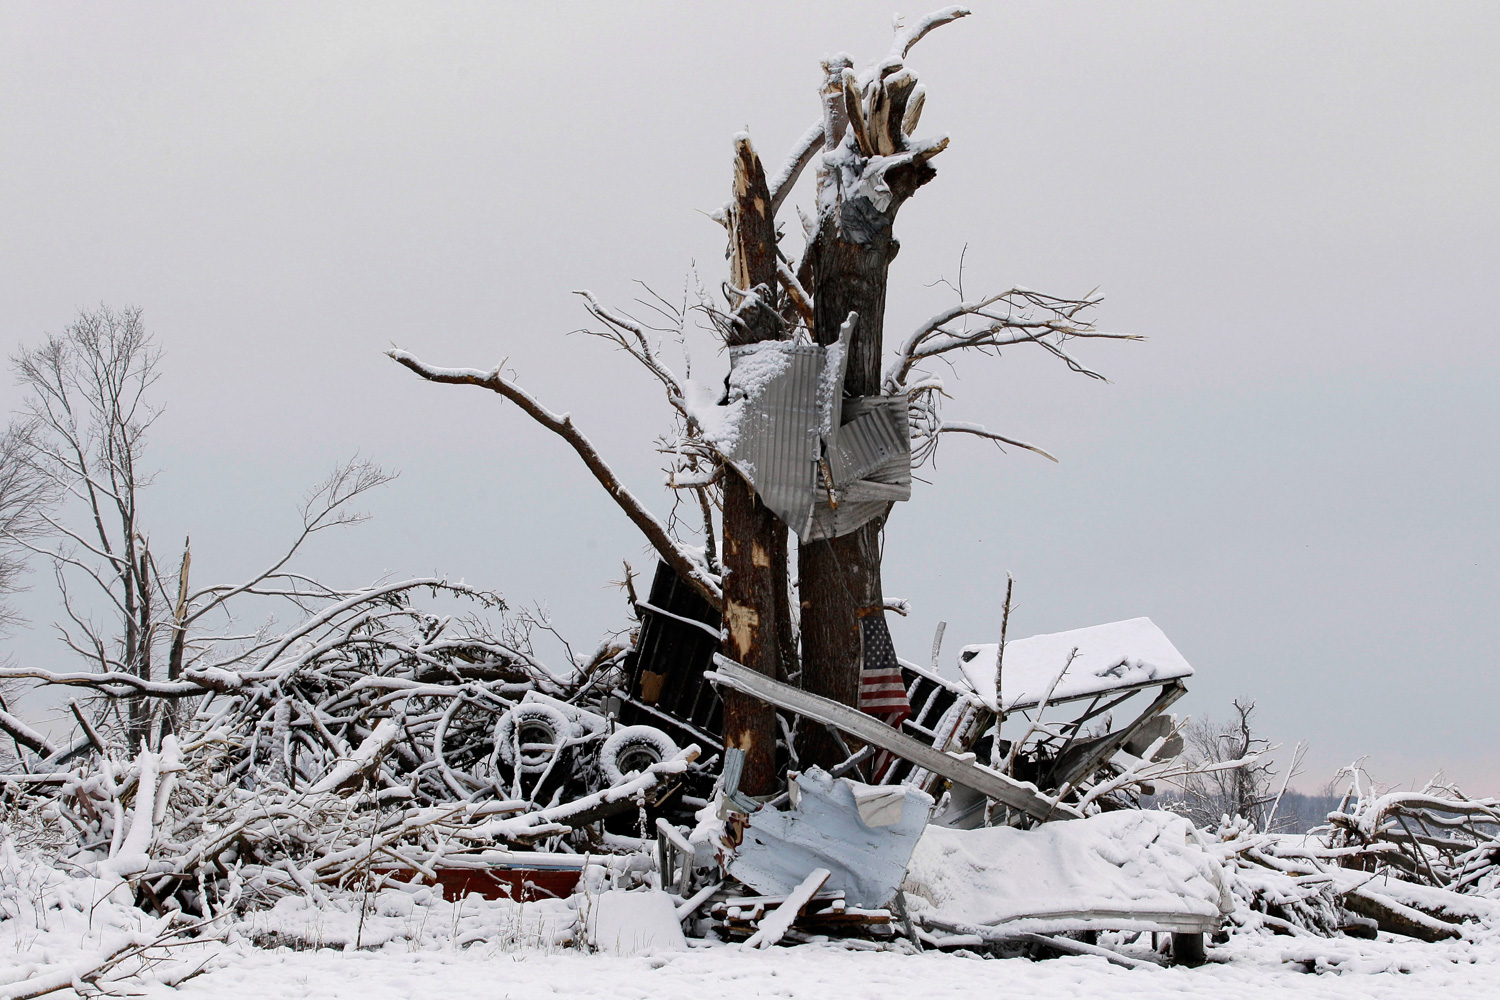 March 5, 2012. Snow covers a demolished house in Marysville, Ind., after a tornado ripped through the town.